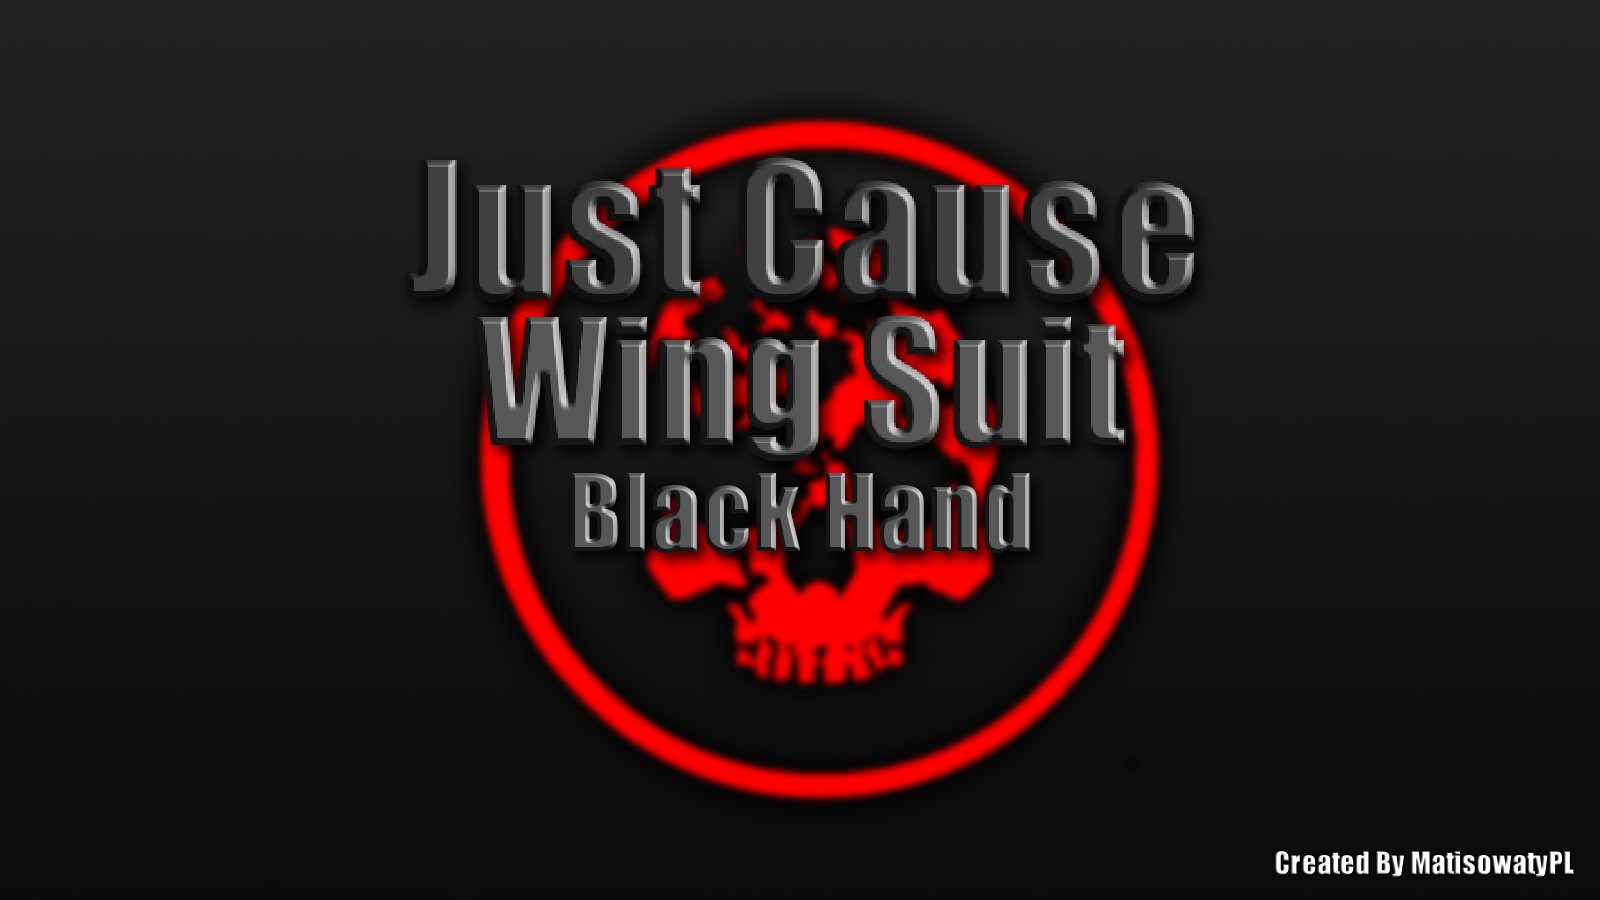 Just Cause 3 Black Hand Wing Suit